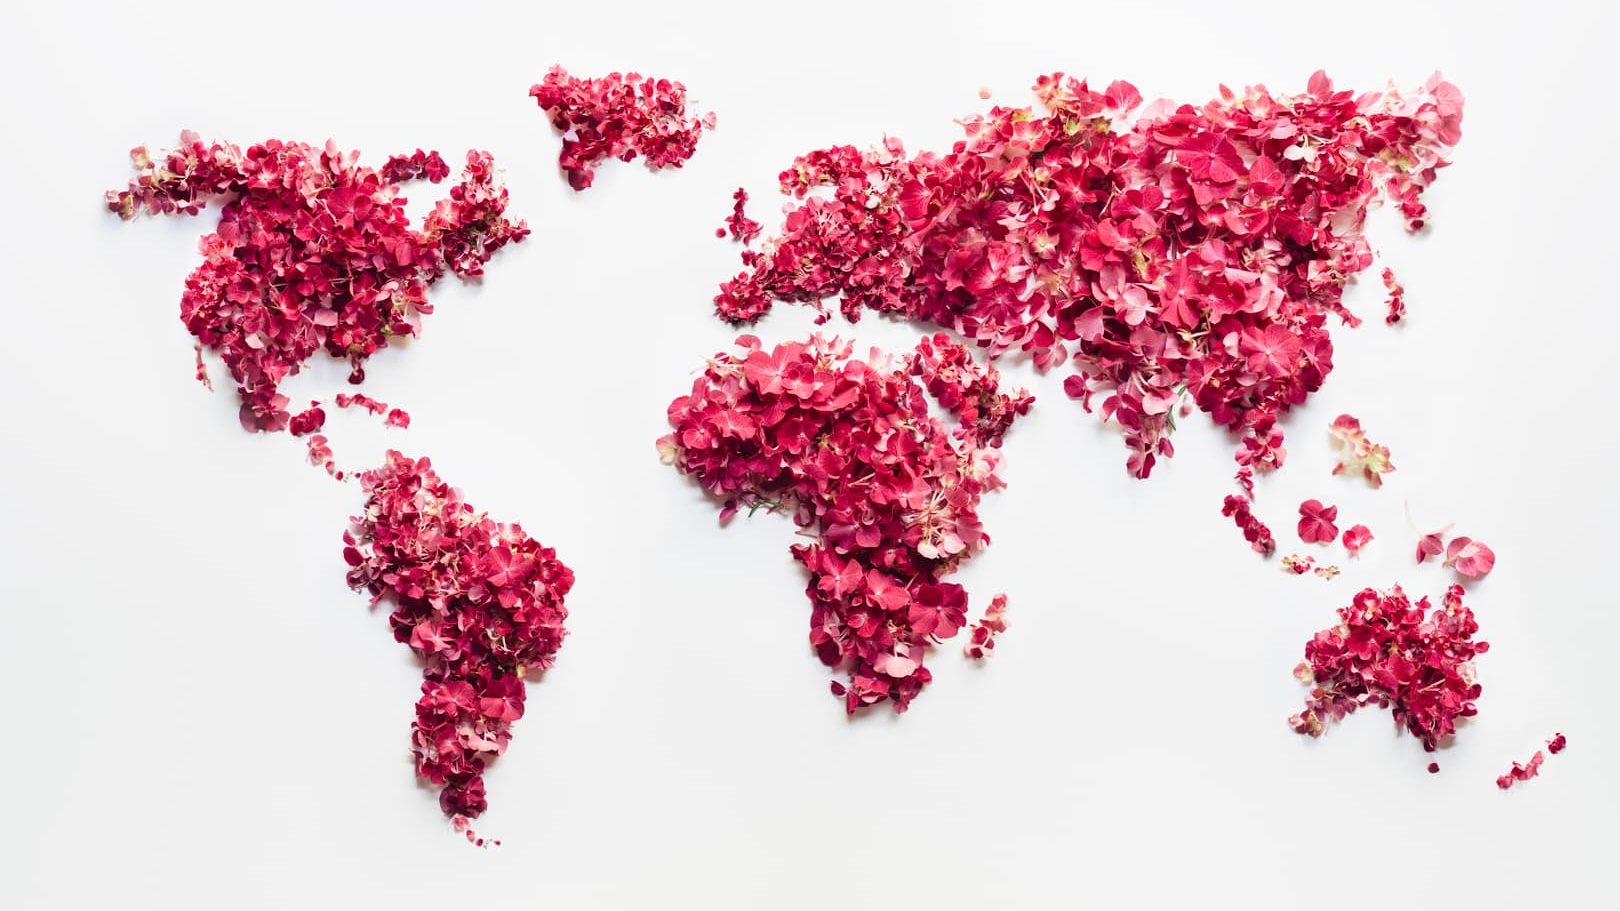 Handmade word map made of pink flowers and flower petals. Continents are quite clear. The whole scene is on white background. White is great for copy space.